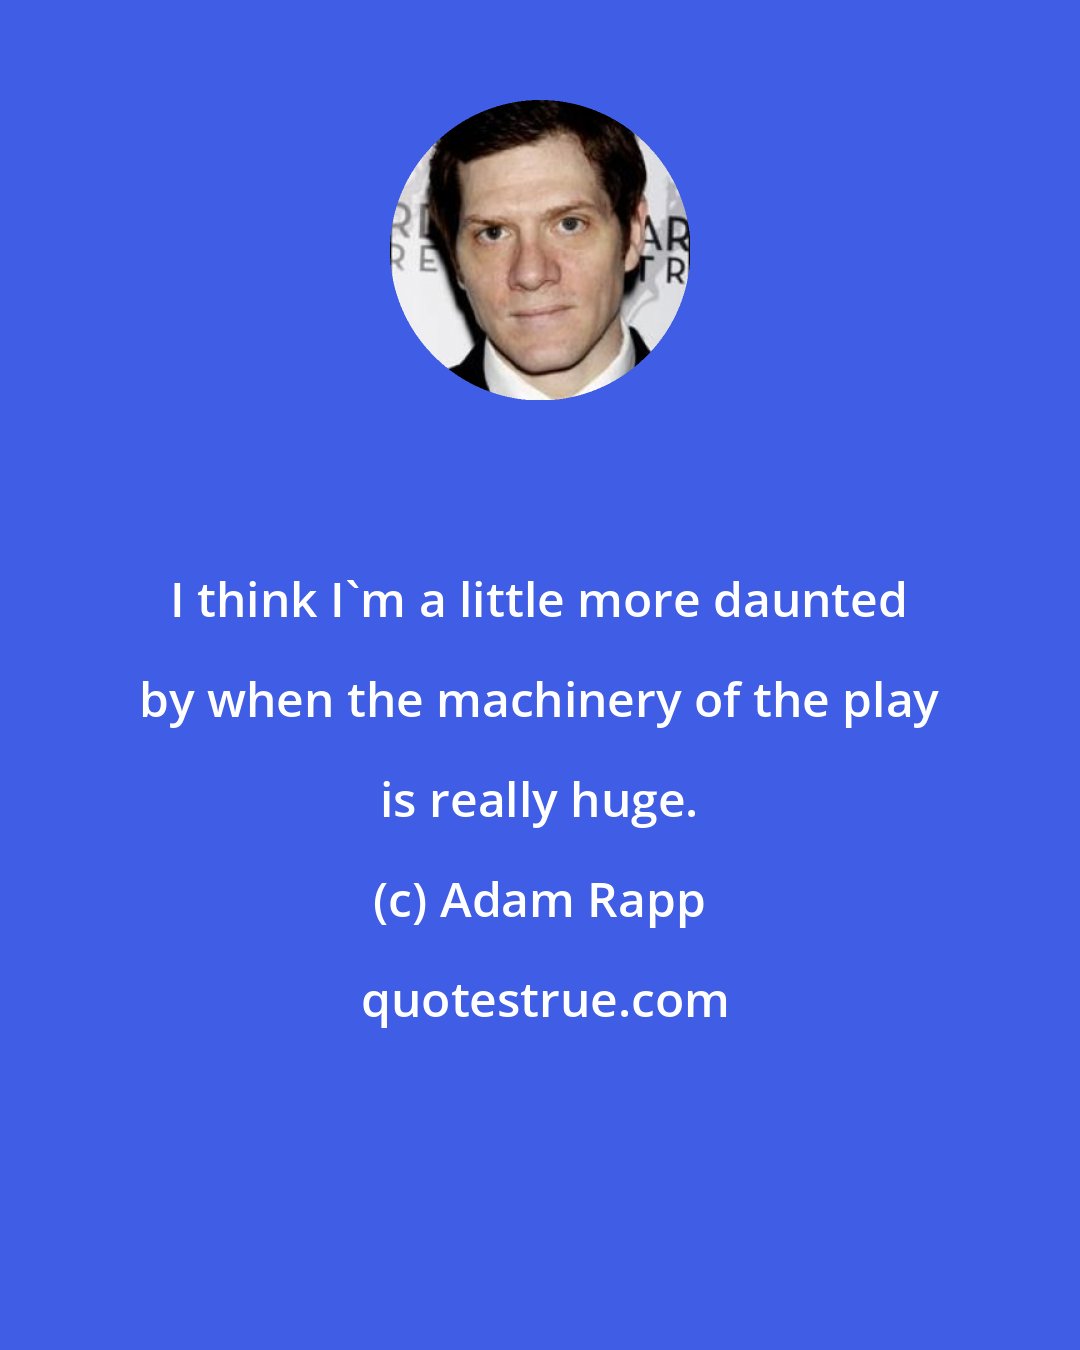 Adam Rapp: I think I'm a little more daunted by when the machinery of the play is really huge.